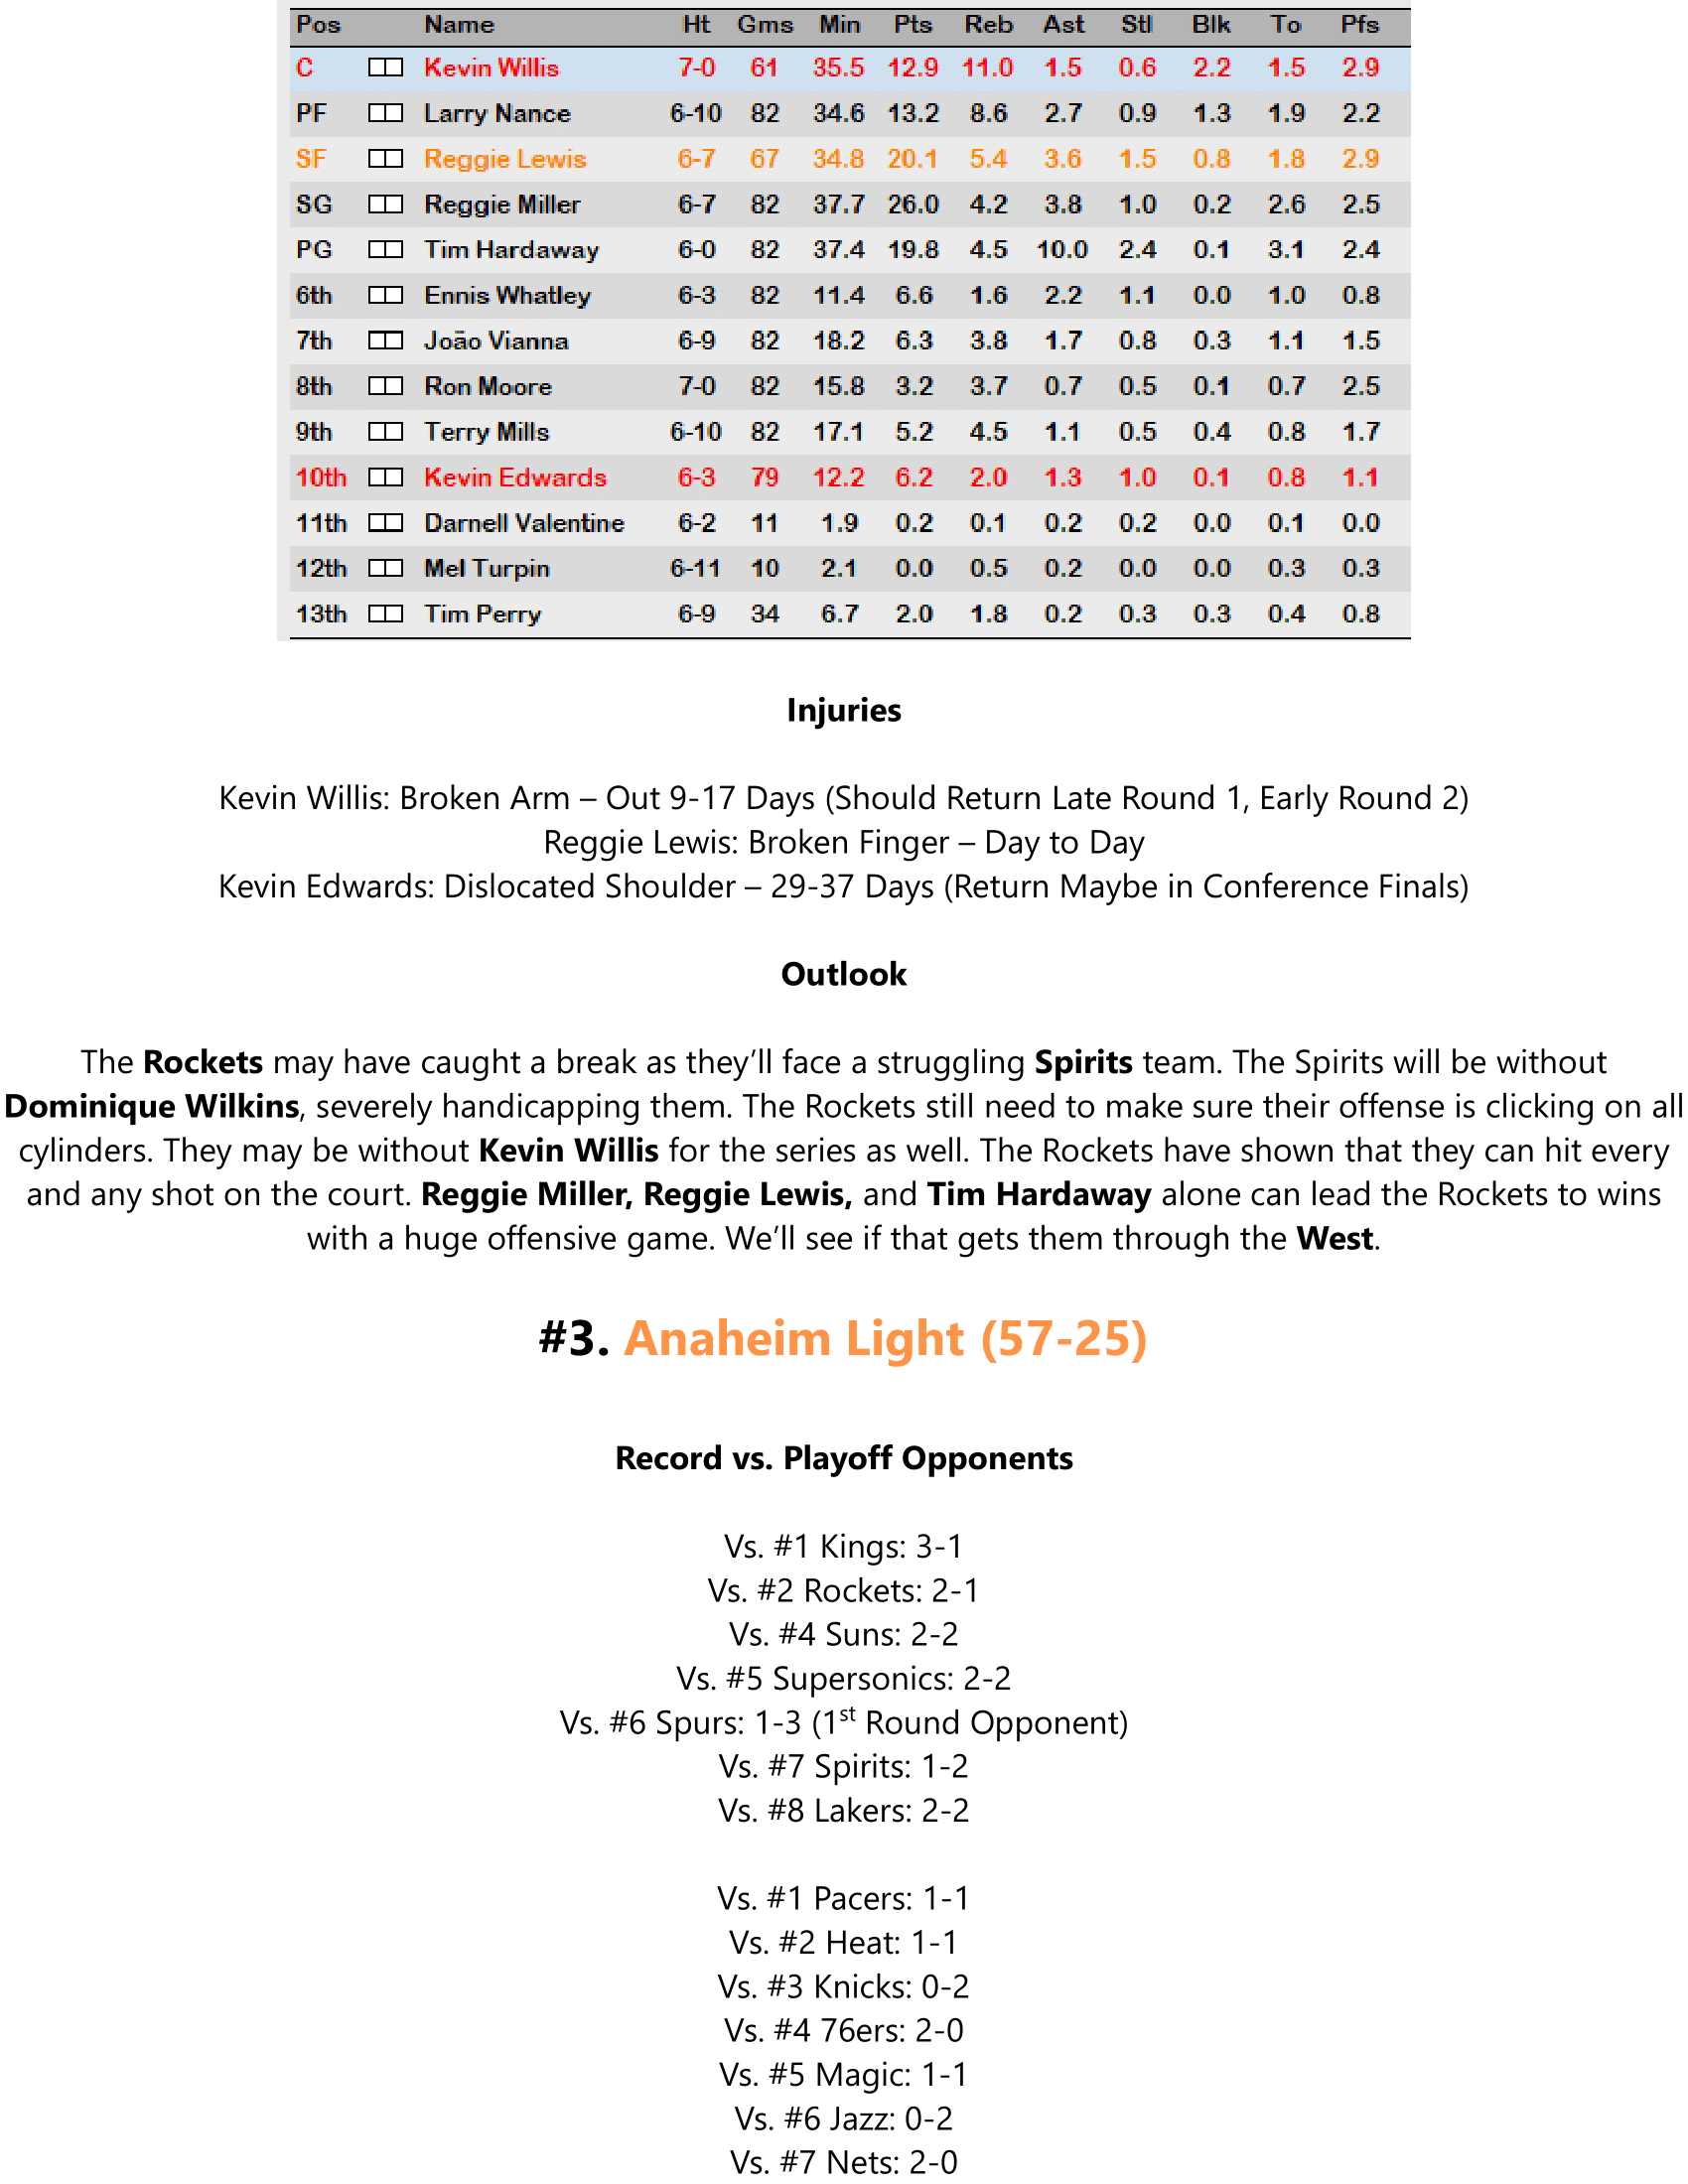 91-92-Part-4-Playoff-Preview-04.png